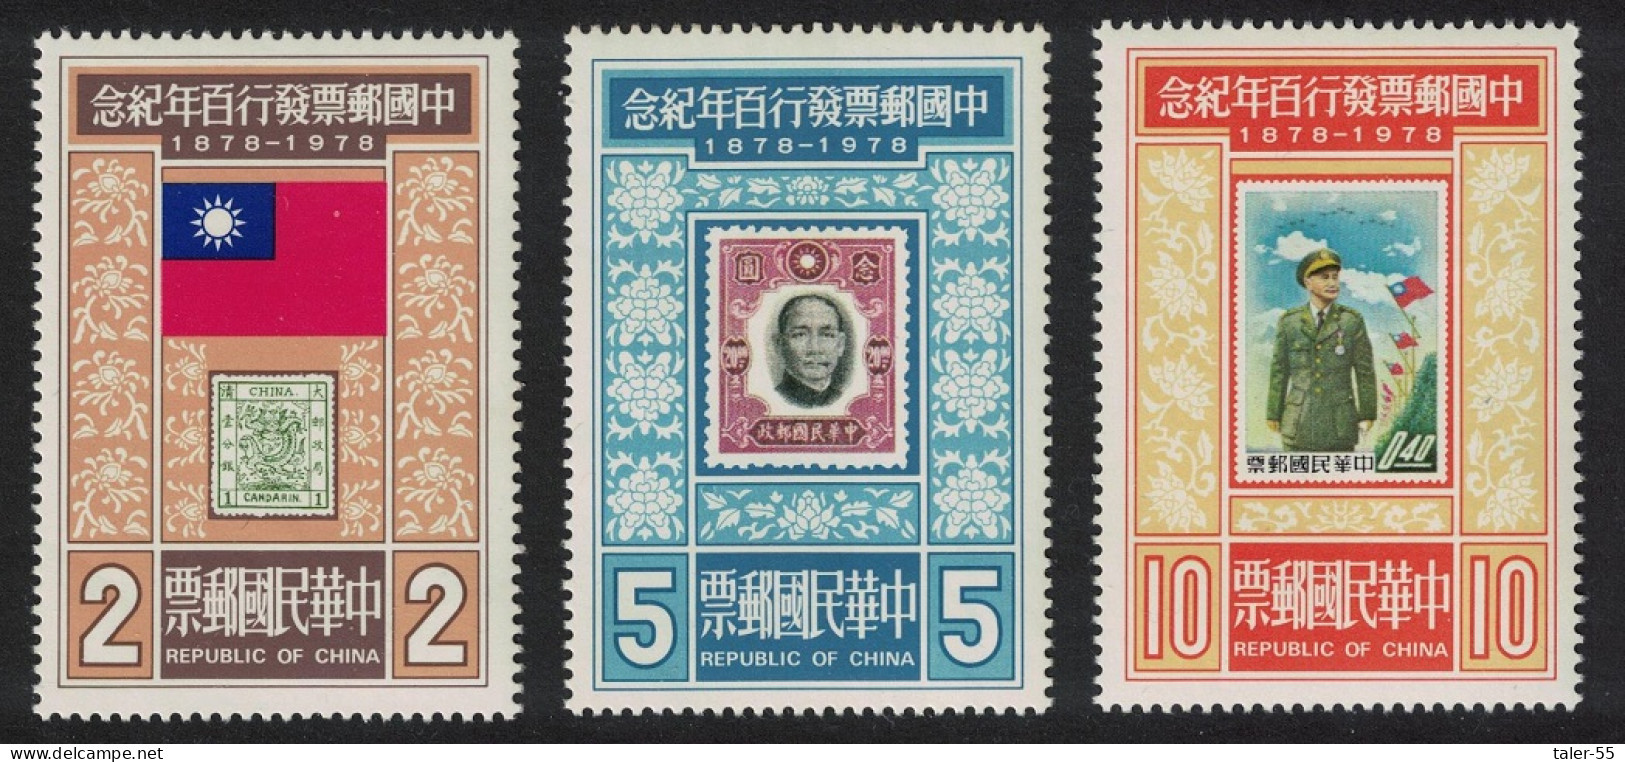 Taiwan Centenary Of Chinese Postage Stamp 3v 1978 MNH SG#1188-1190 - Neufs